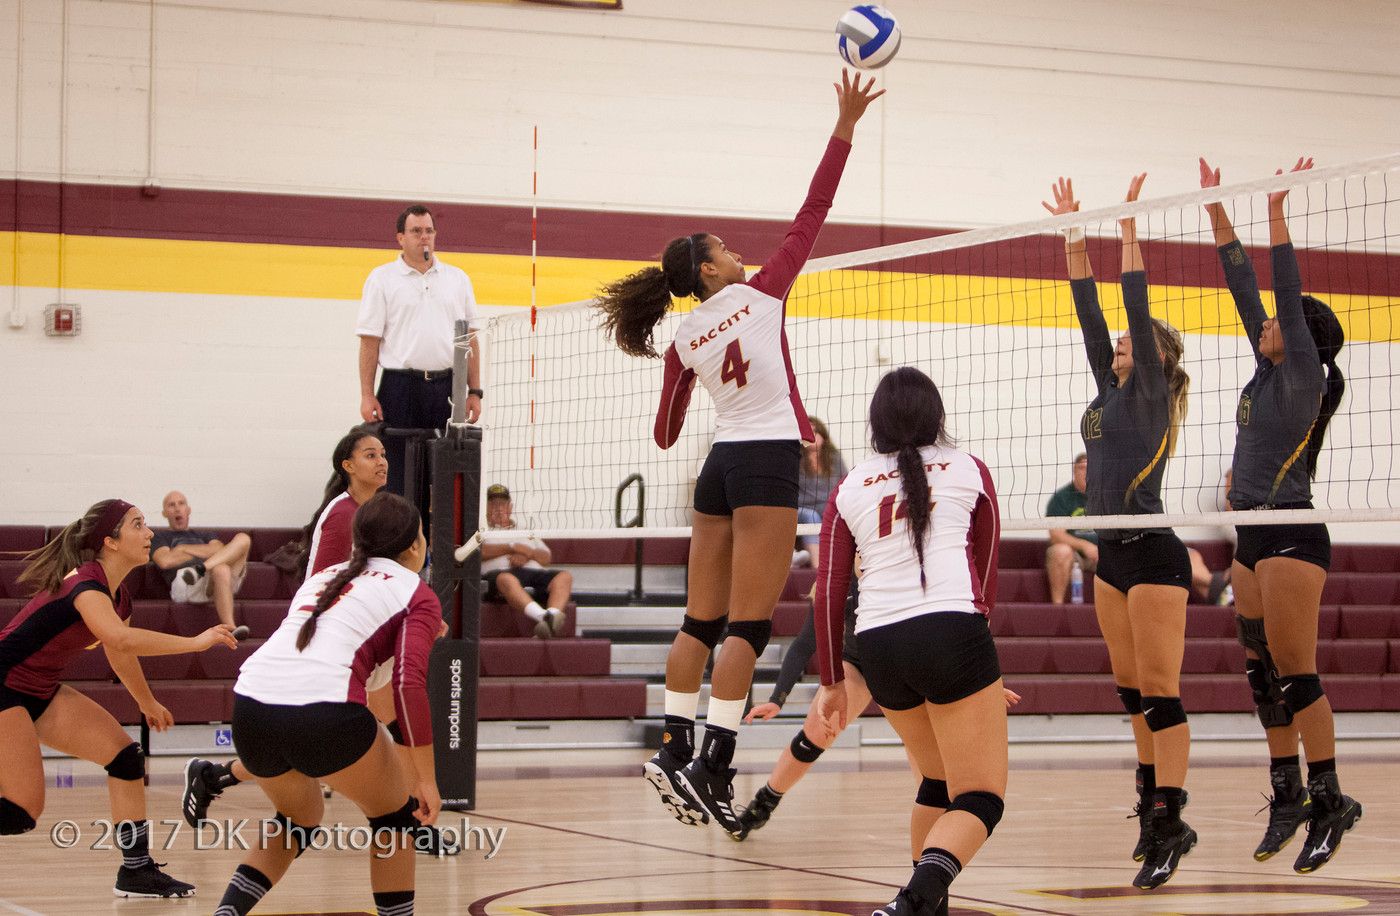 The Golden Eagles beat the Panthers 3-0 in the SCC Quad Tourney on Friday afternoon